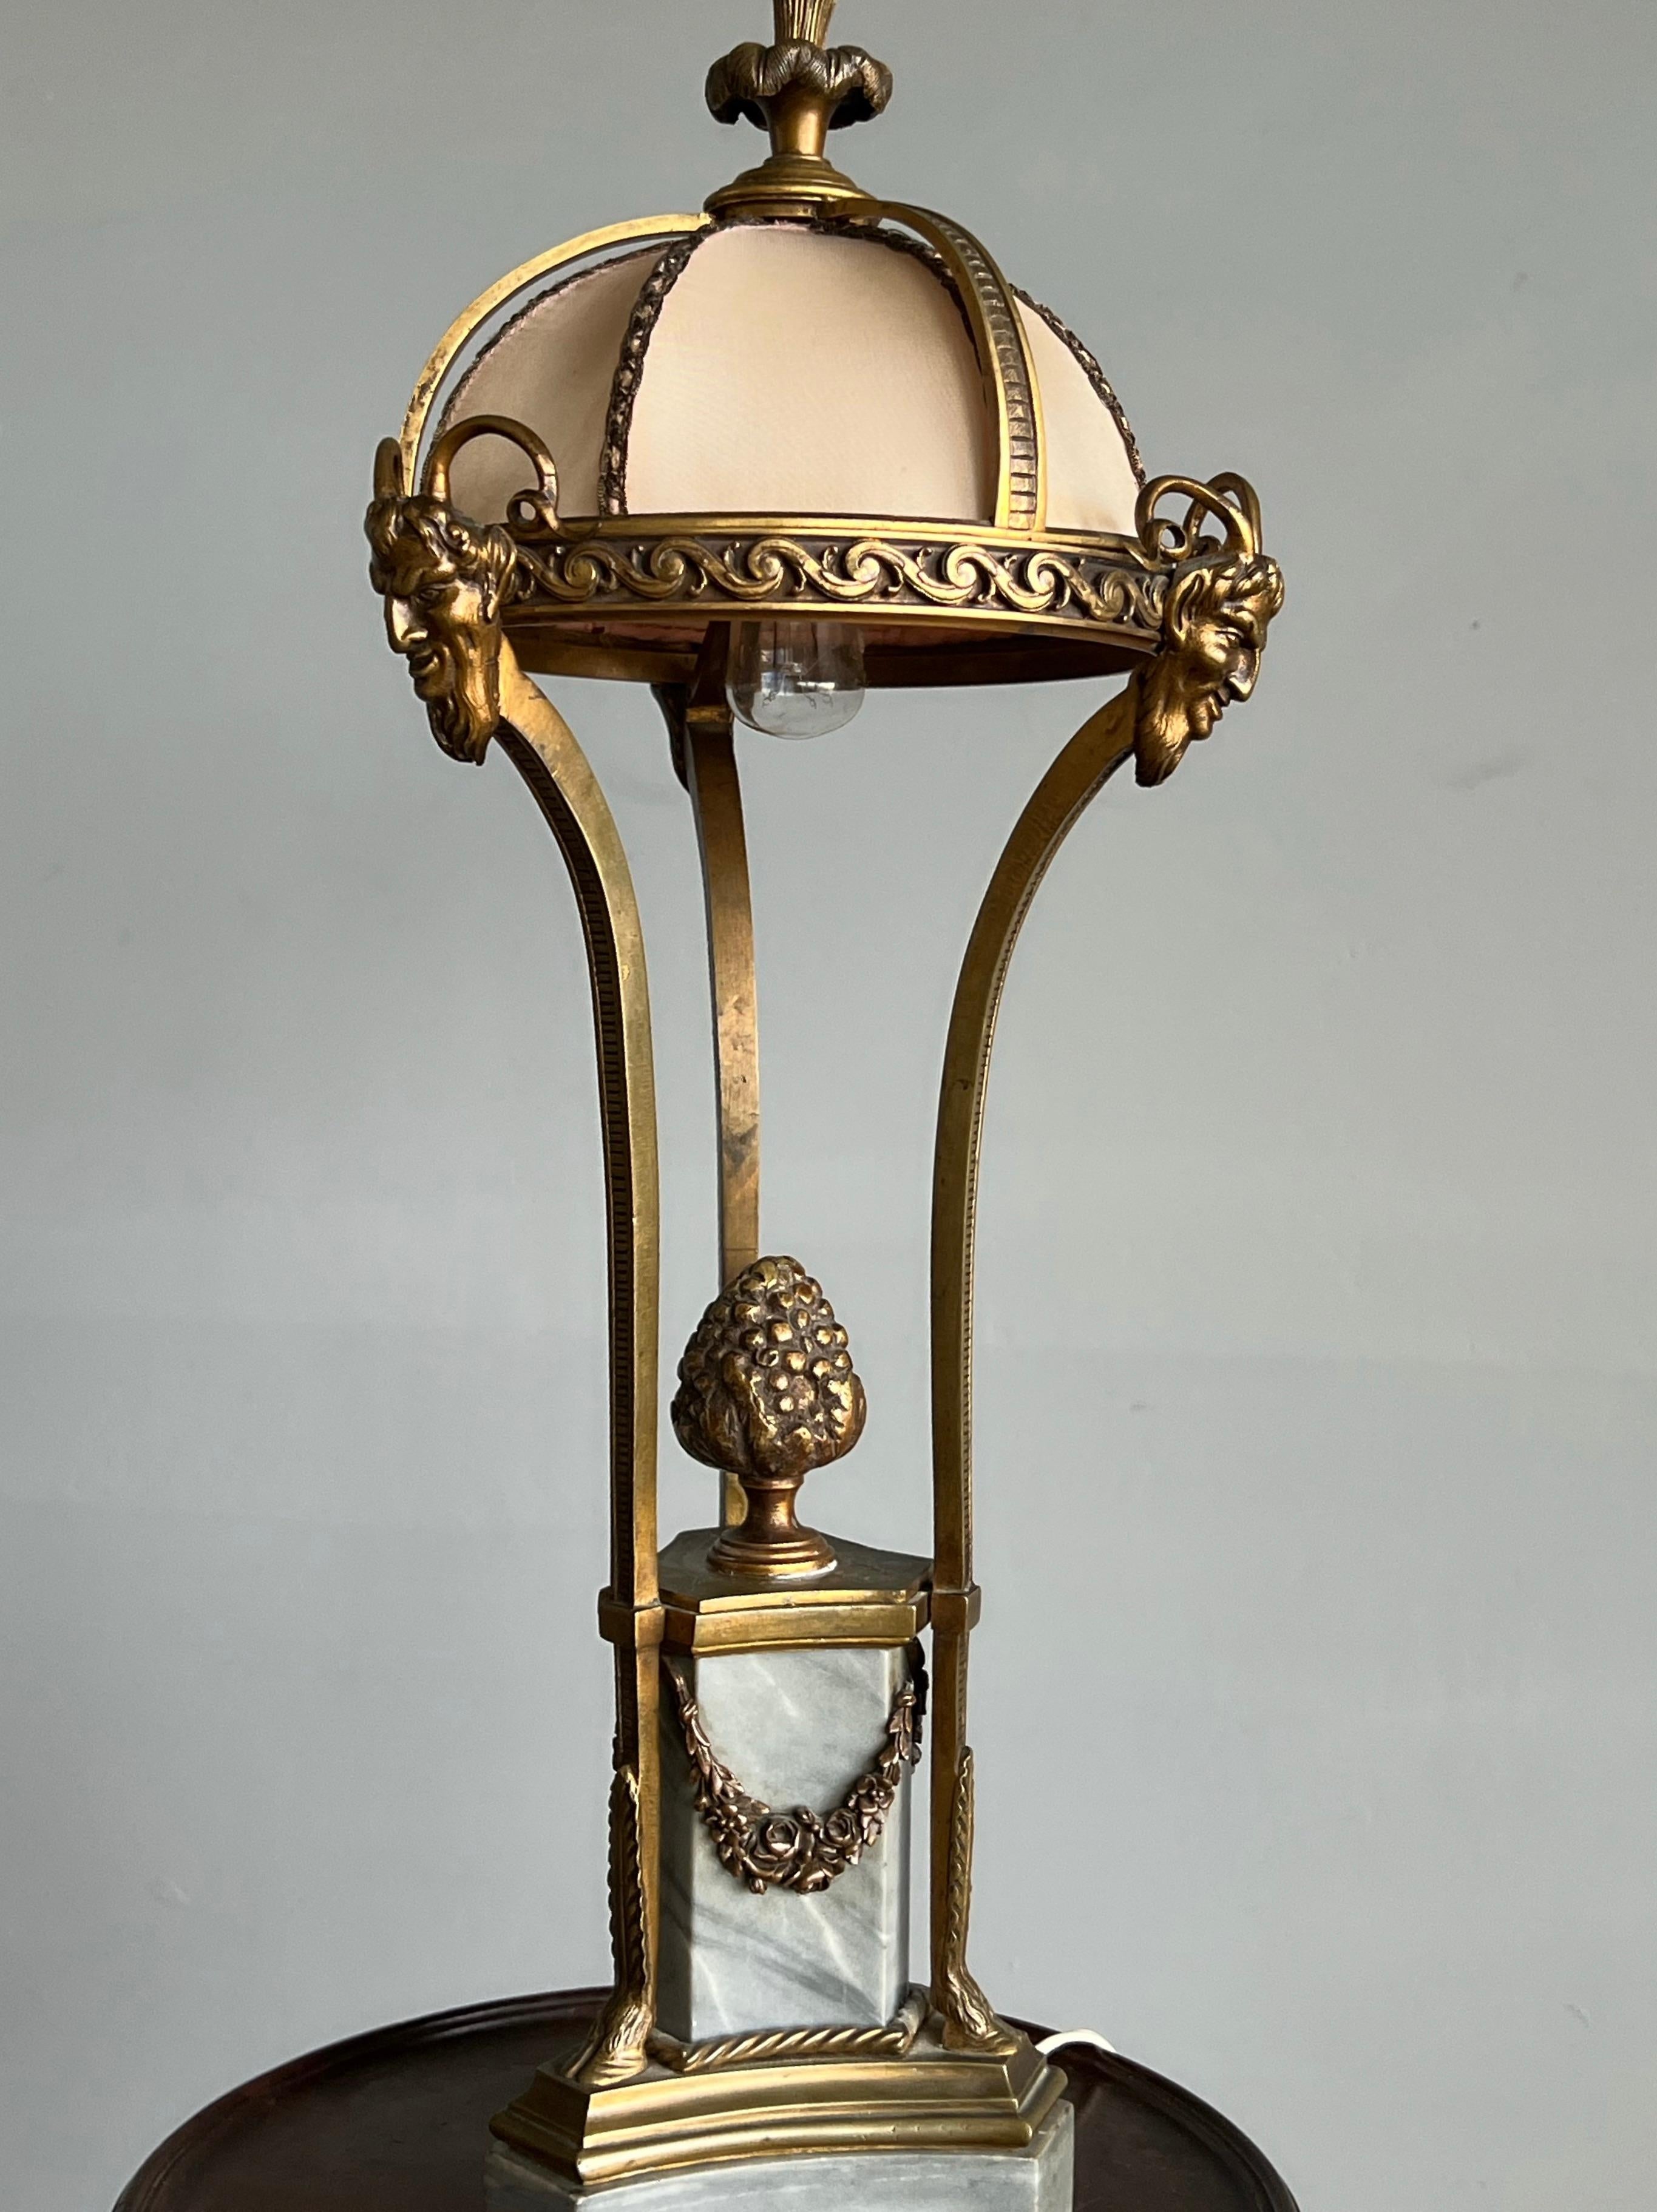 Wonderfully handcrafted antique table or desk lamp for a unique ambiance.

If you are looking for a rare, beautiful design and top quality hand-crafted table lamp then this remarkable specimen could be ideal to grace your living space. The artisan